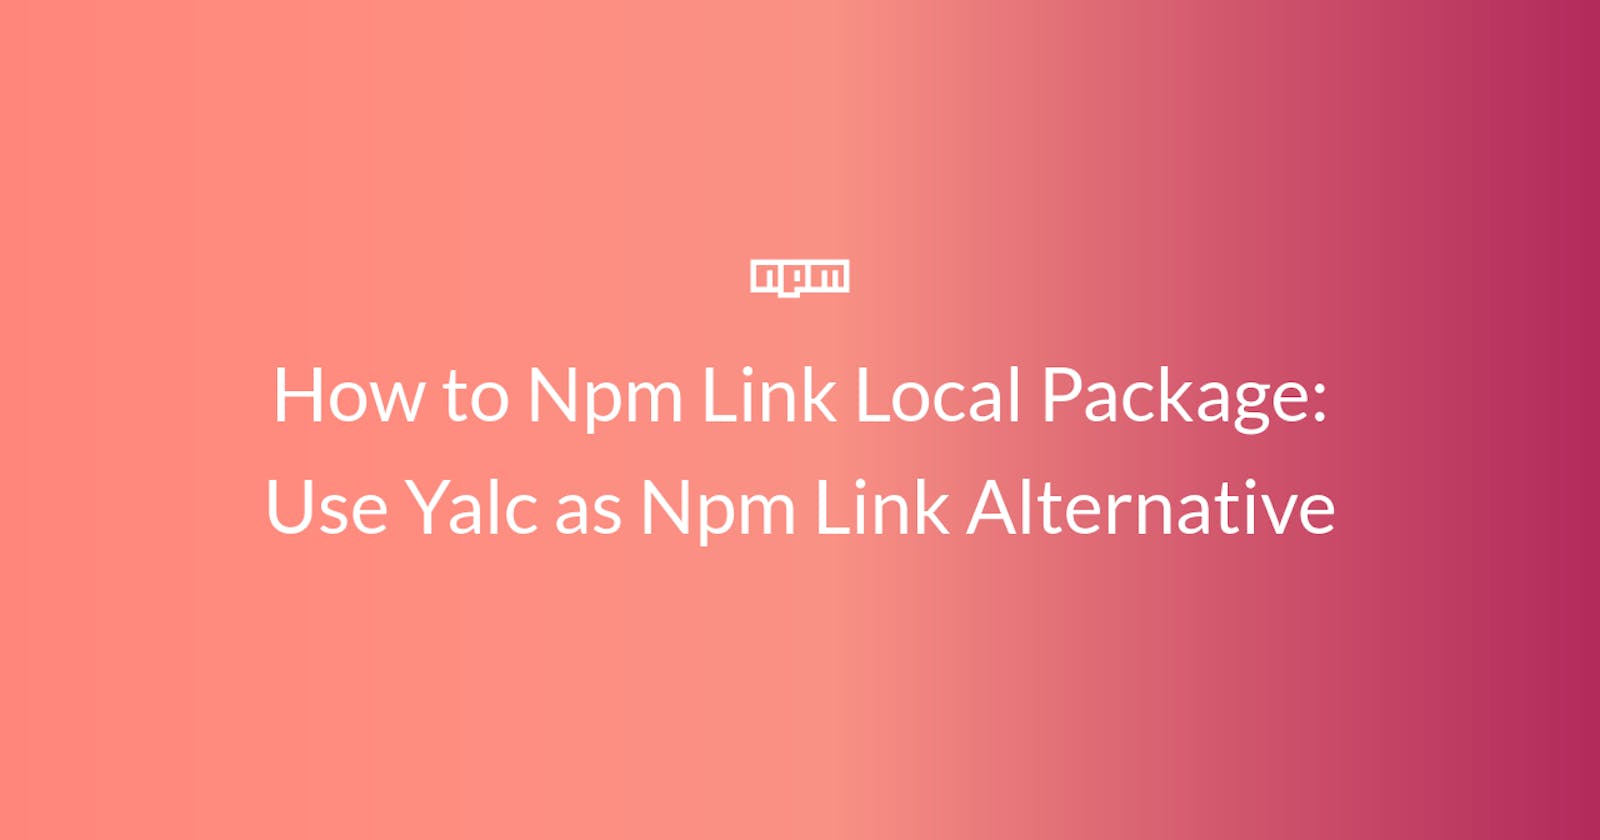 How to Npm Link Local Package: Use Yalc as Npm Link Alternative